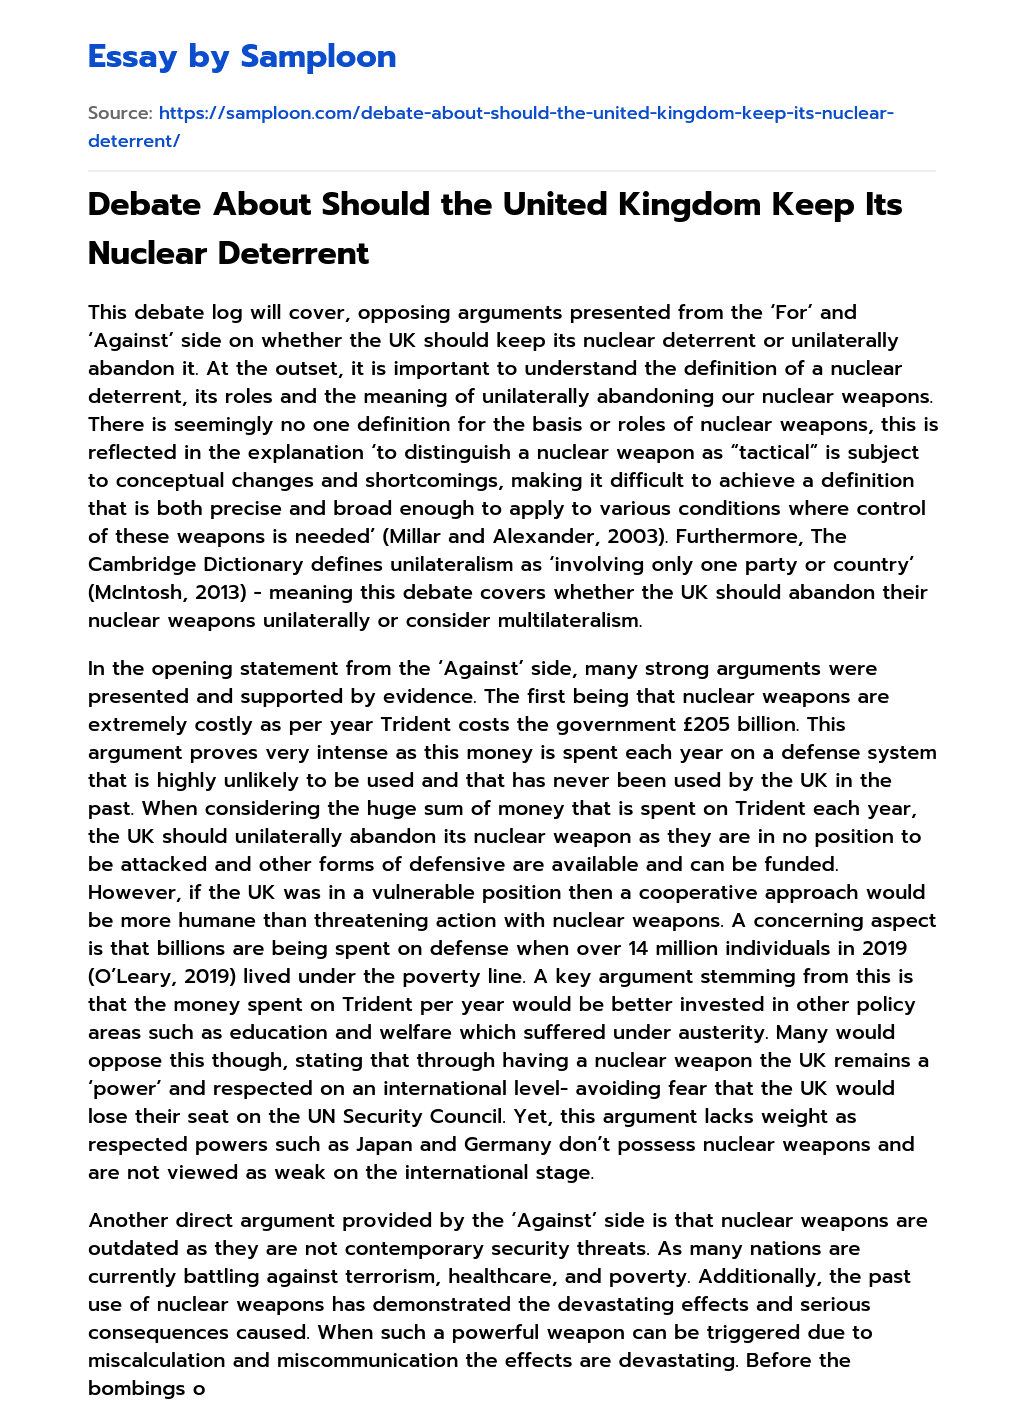 Debate About Should the United Kingdom Keep Its Nuclear Deterrent essay